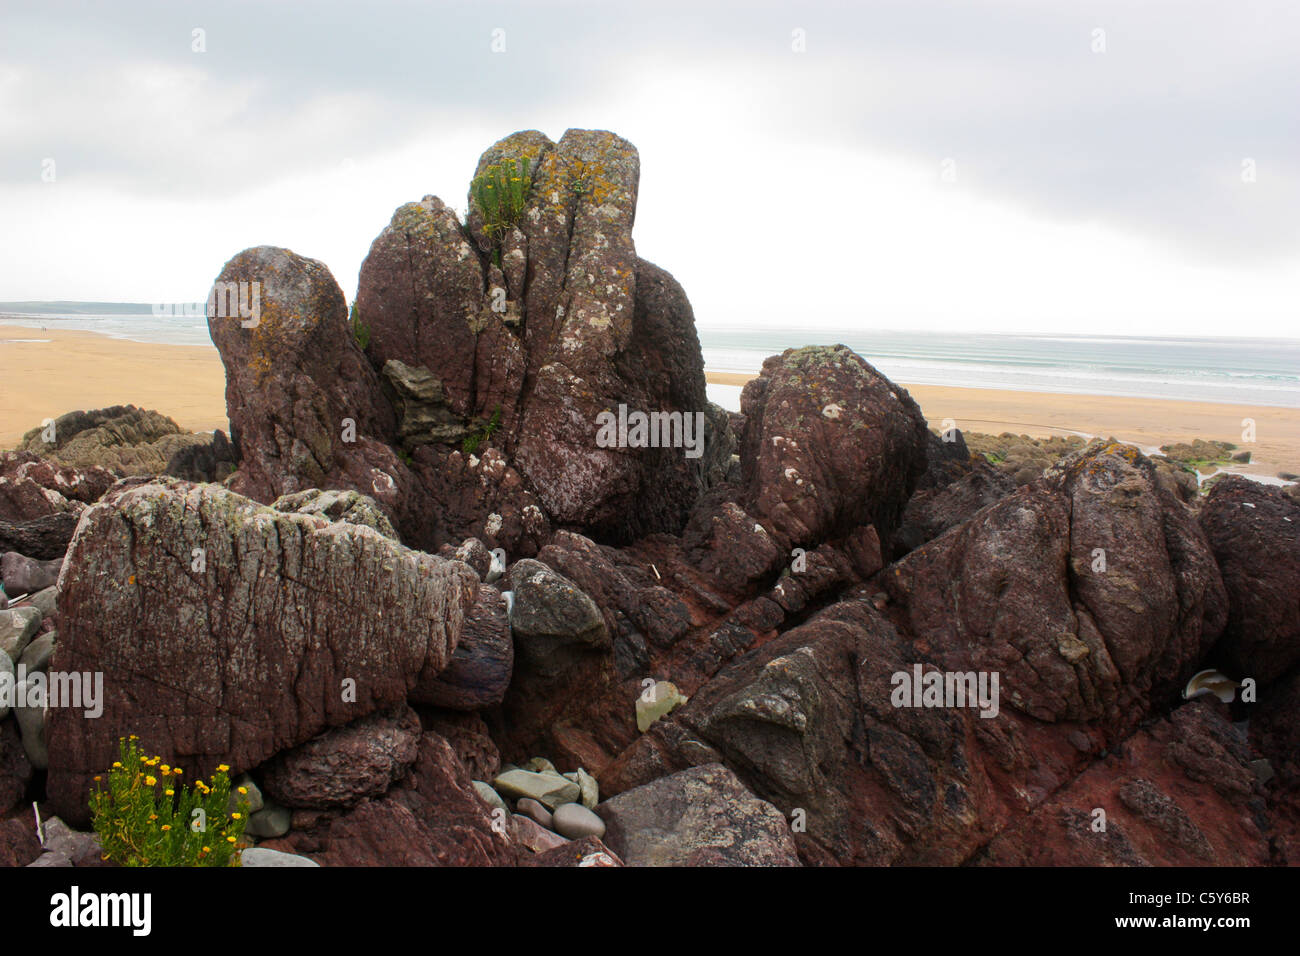 Rock formation at Freshwater West beach in Pembrokeshire, Wales Stock Photo